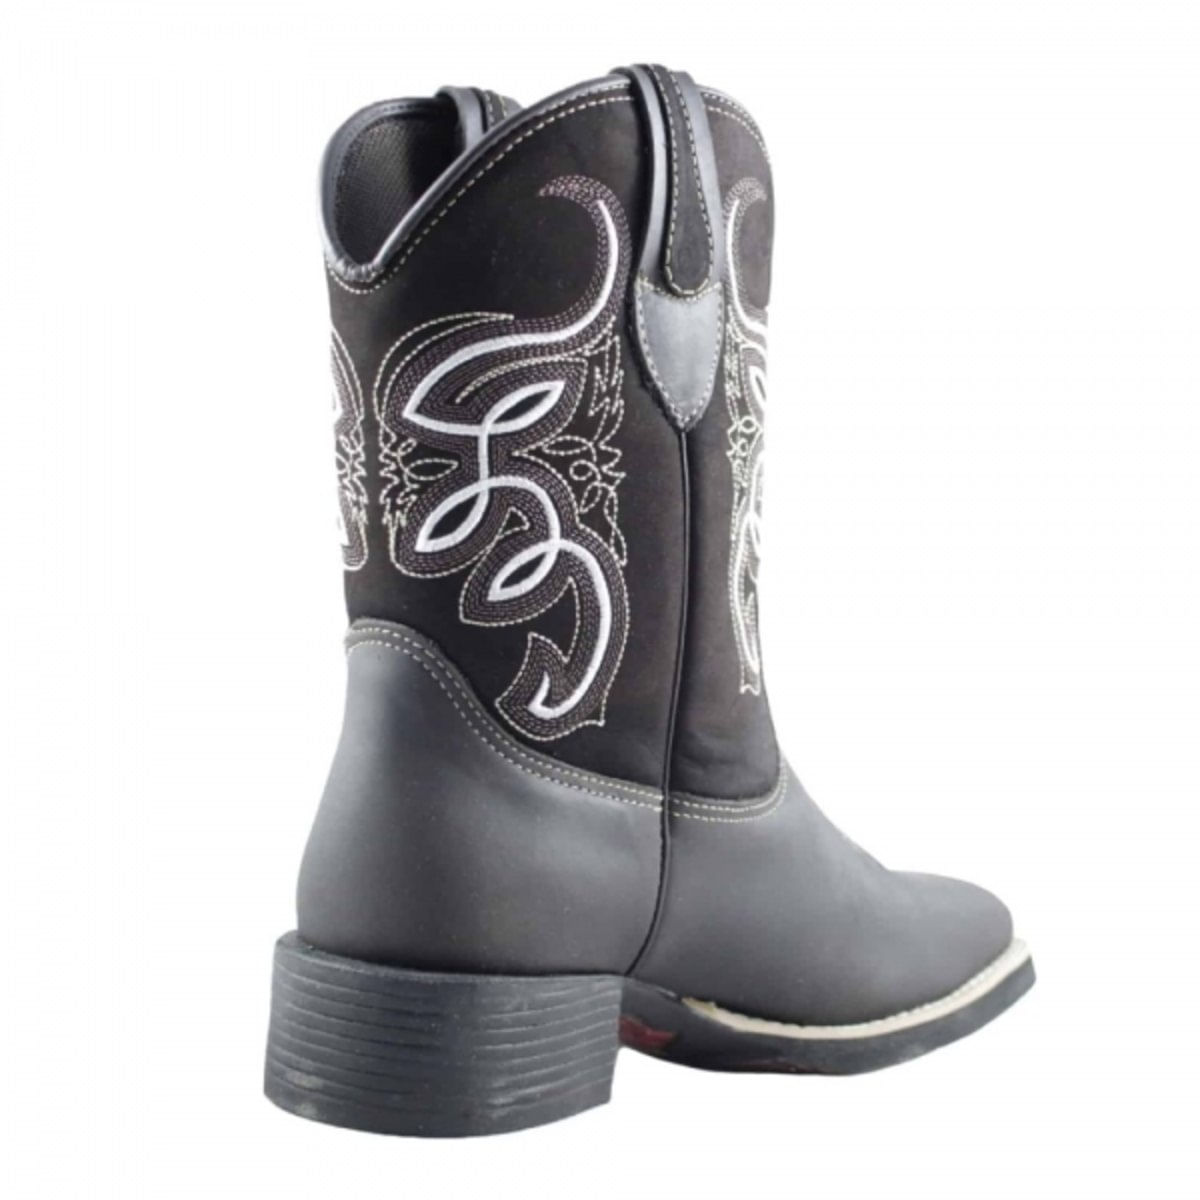 passo livre country boots